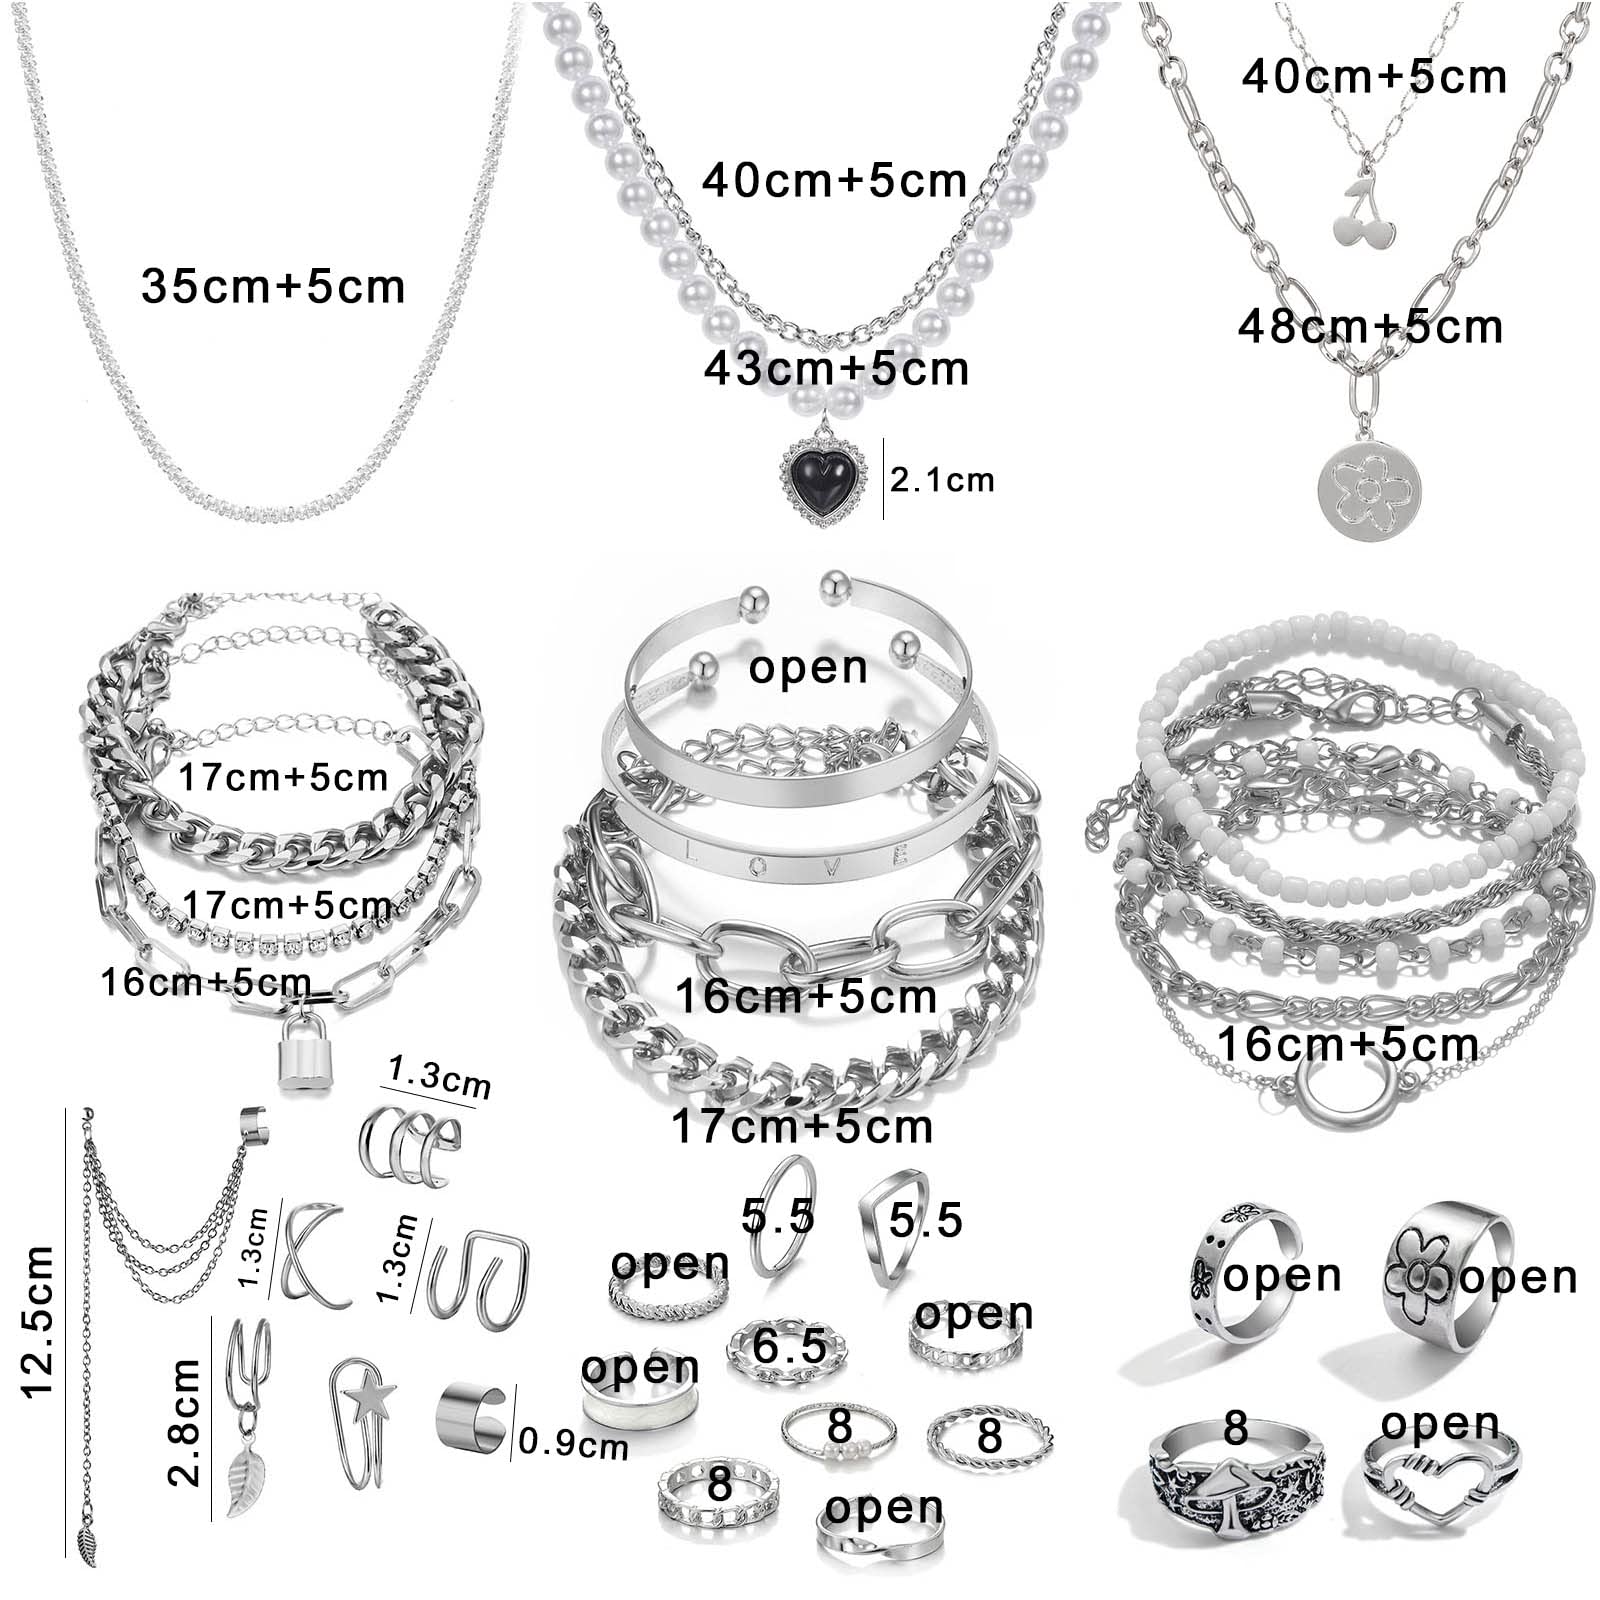 IFKM 36 PCS Silver Plated Jewelry Set with 3 PCS Necklace, 12 PCS Bracelet, 7 PCS Ear Cuffs Earring, 14 Pcs Knuckle Rings for Women Girls Valentine Anniversary Birthday Friendship Gift